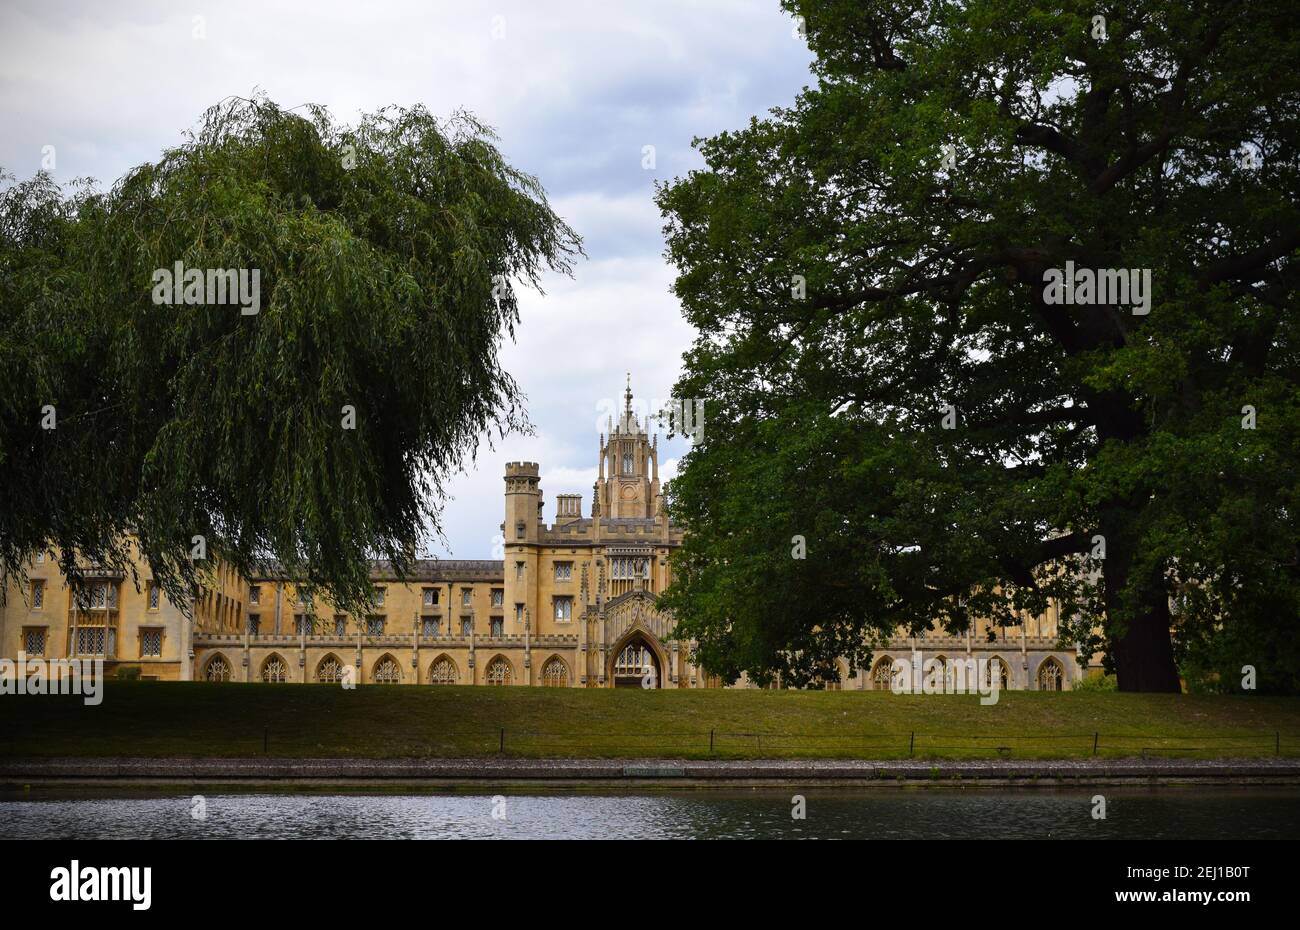 St John's College, Cambridge sits behind some trees Stock Photo